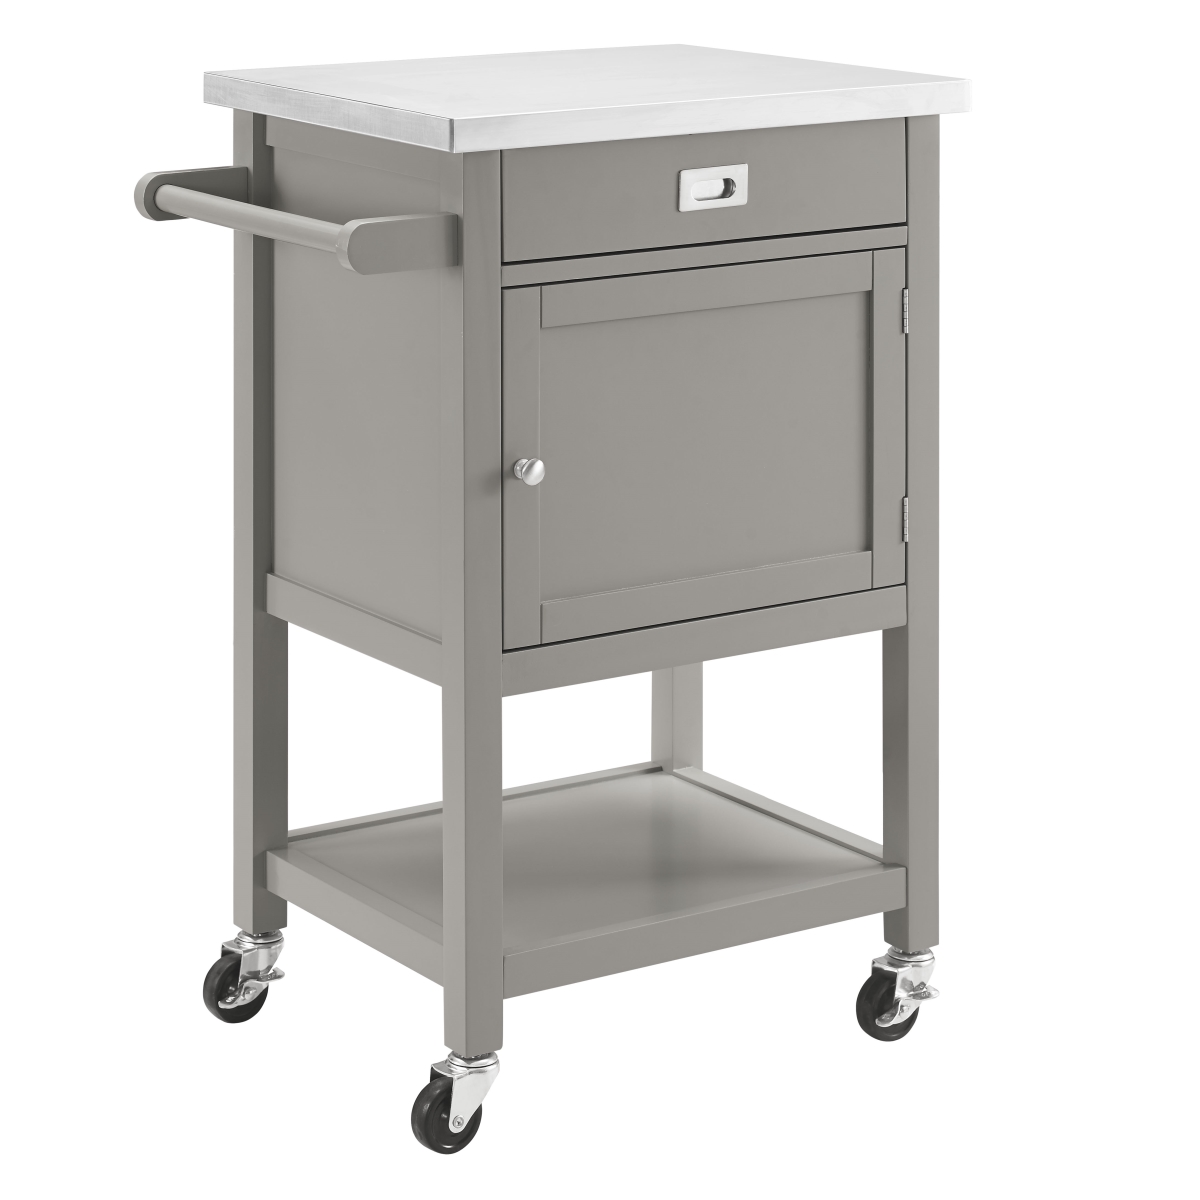 352240 Wooden Apartment Cart With Drawer & Caster Wheels, Gray & Silver